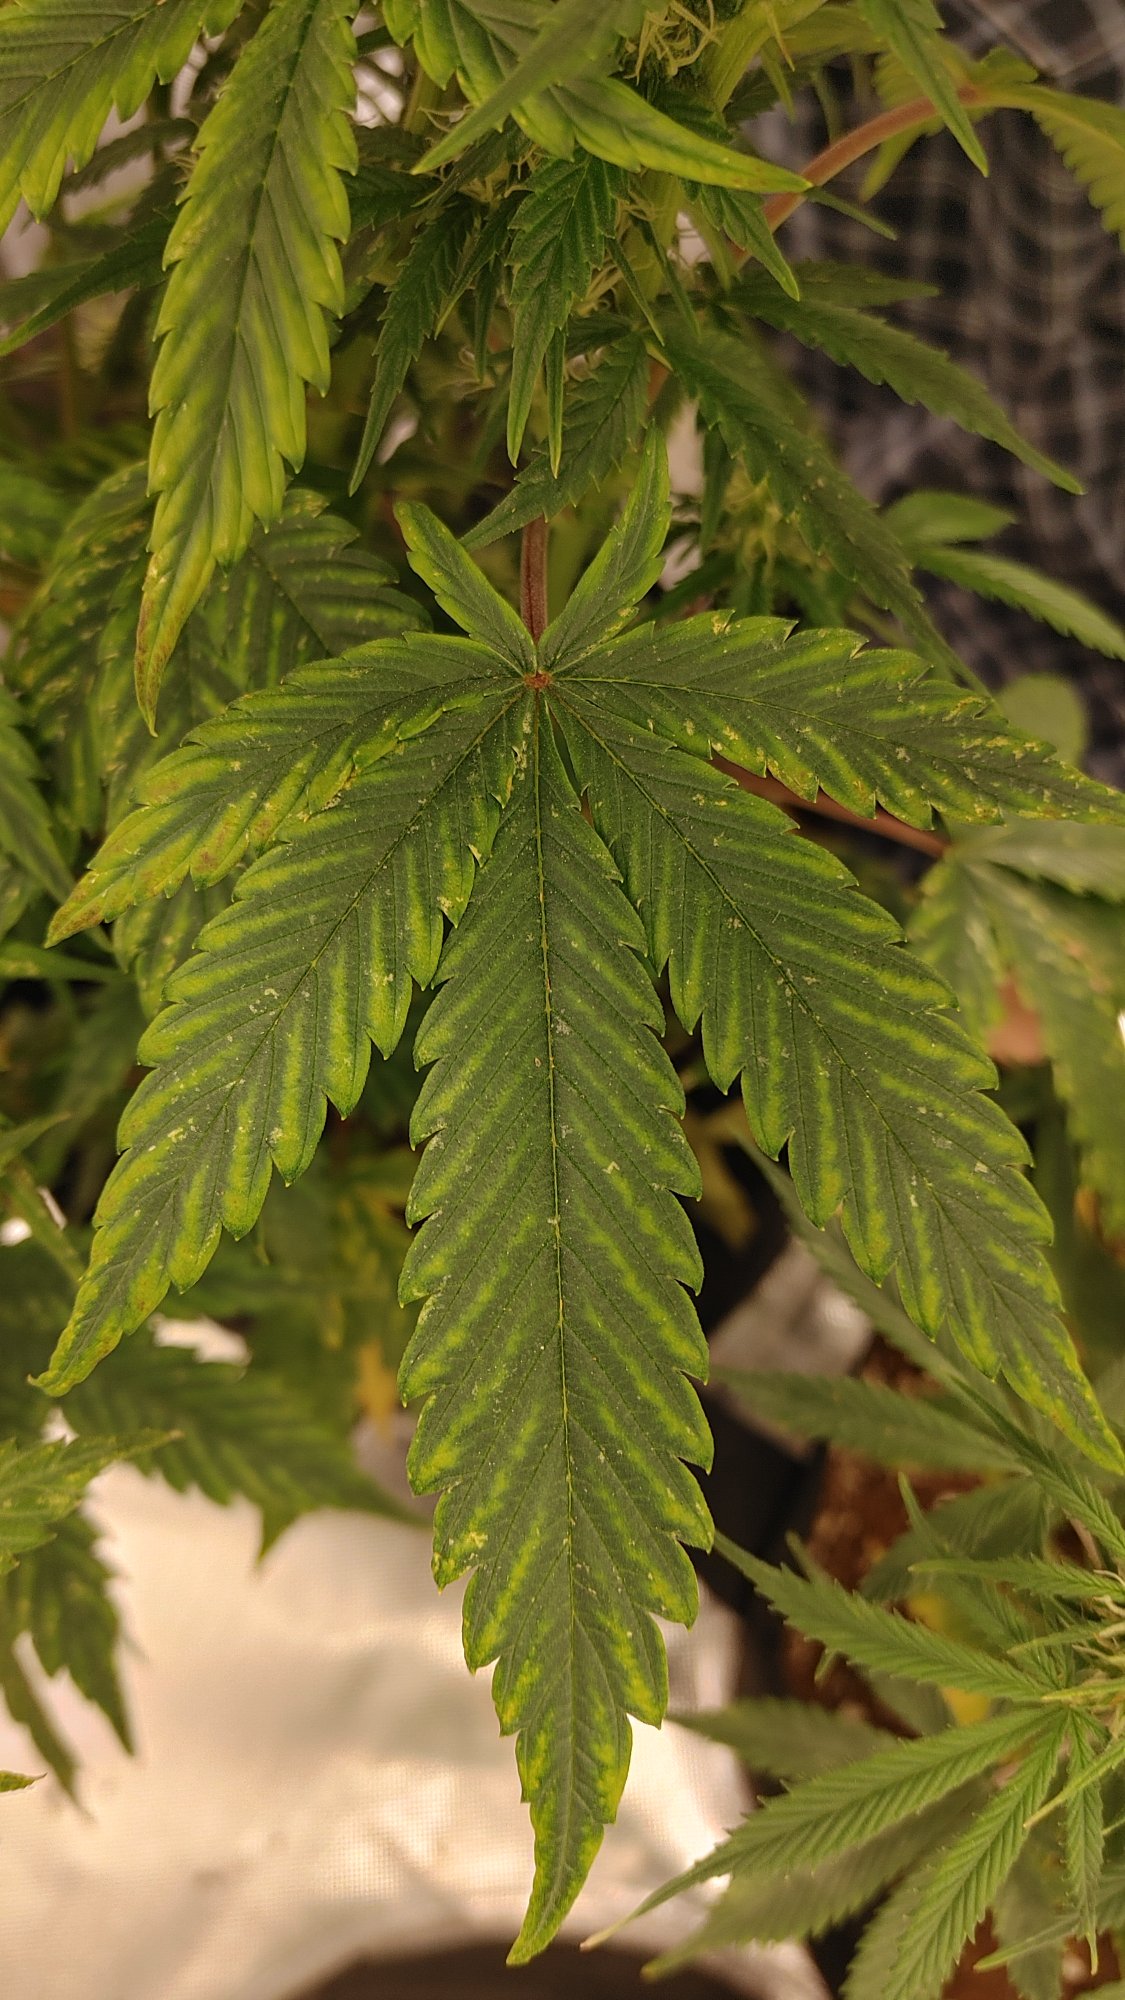 What deficiency causes this in my leaves